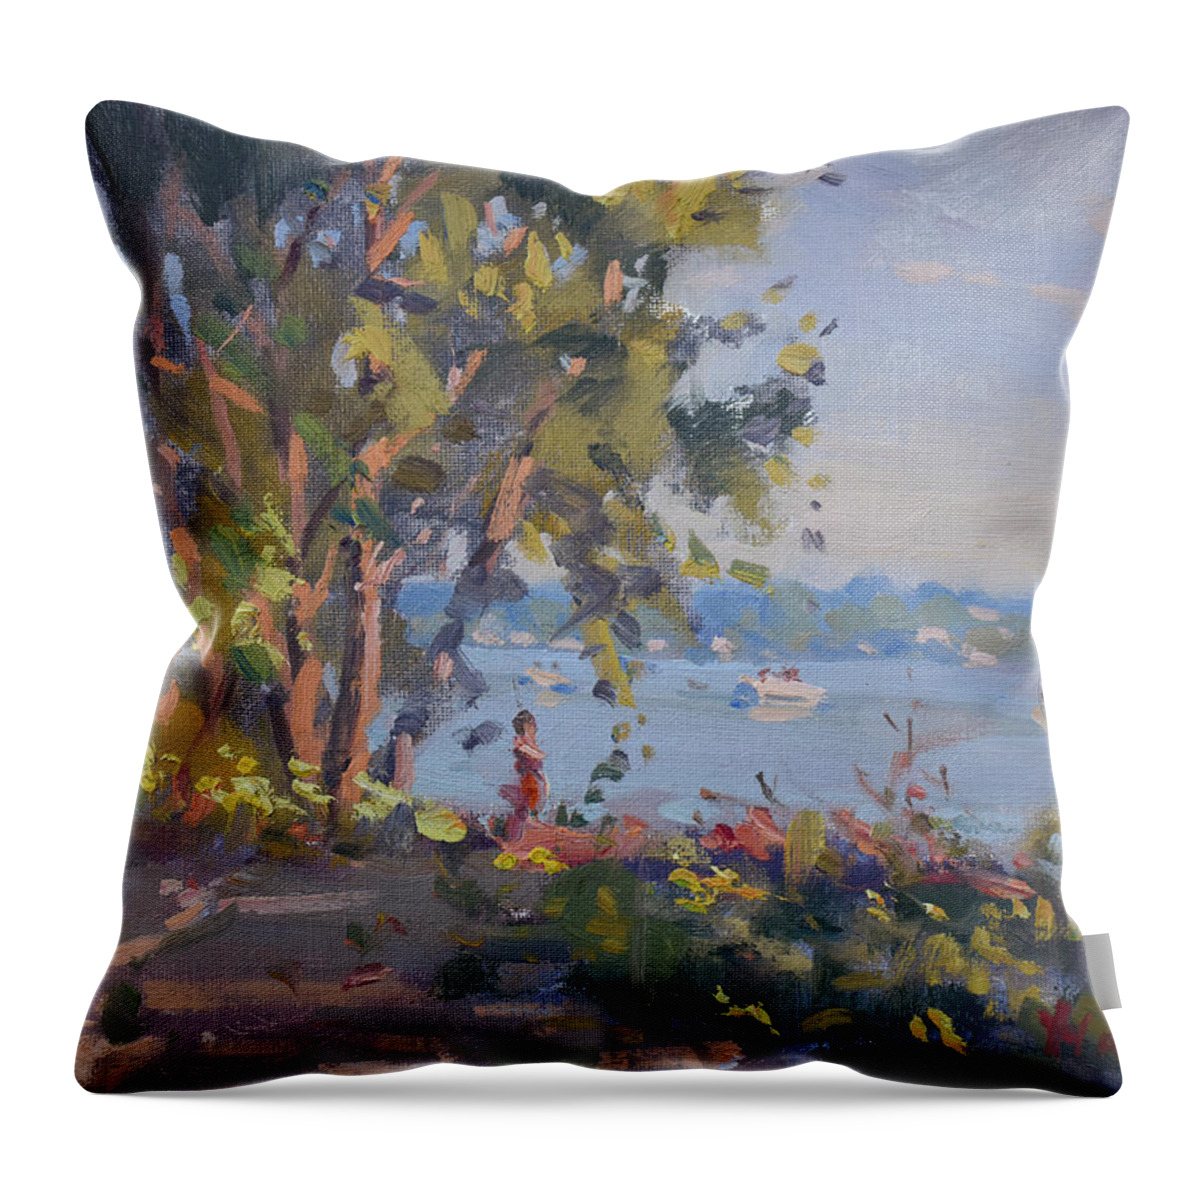 Sunset Throw Pillow featuring the painting Sunset by the Lake by Ylli Haruni